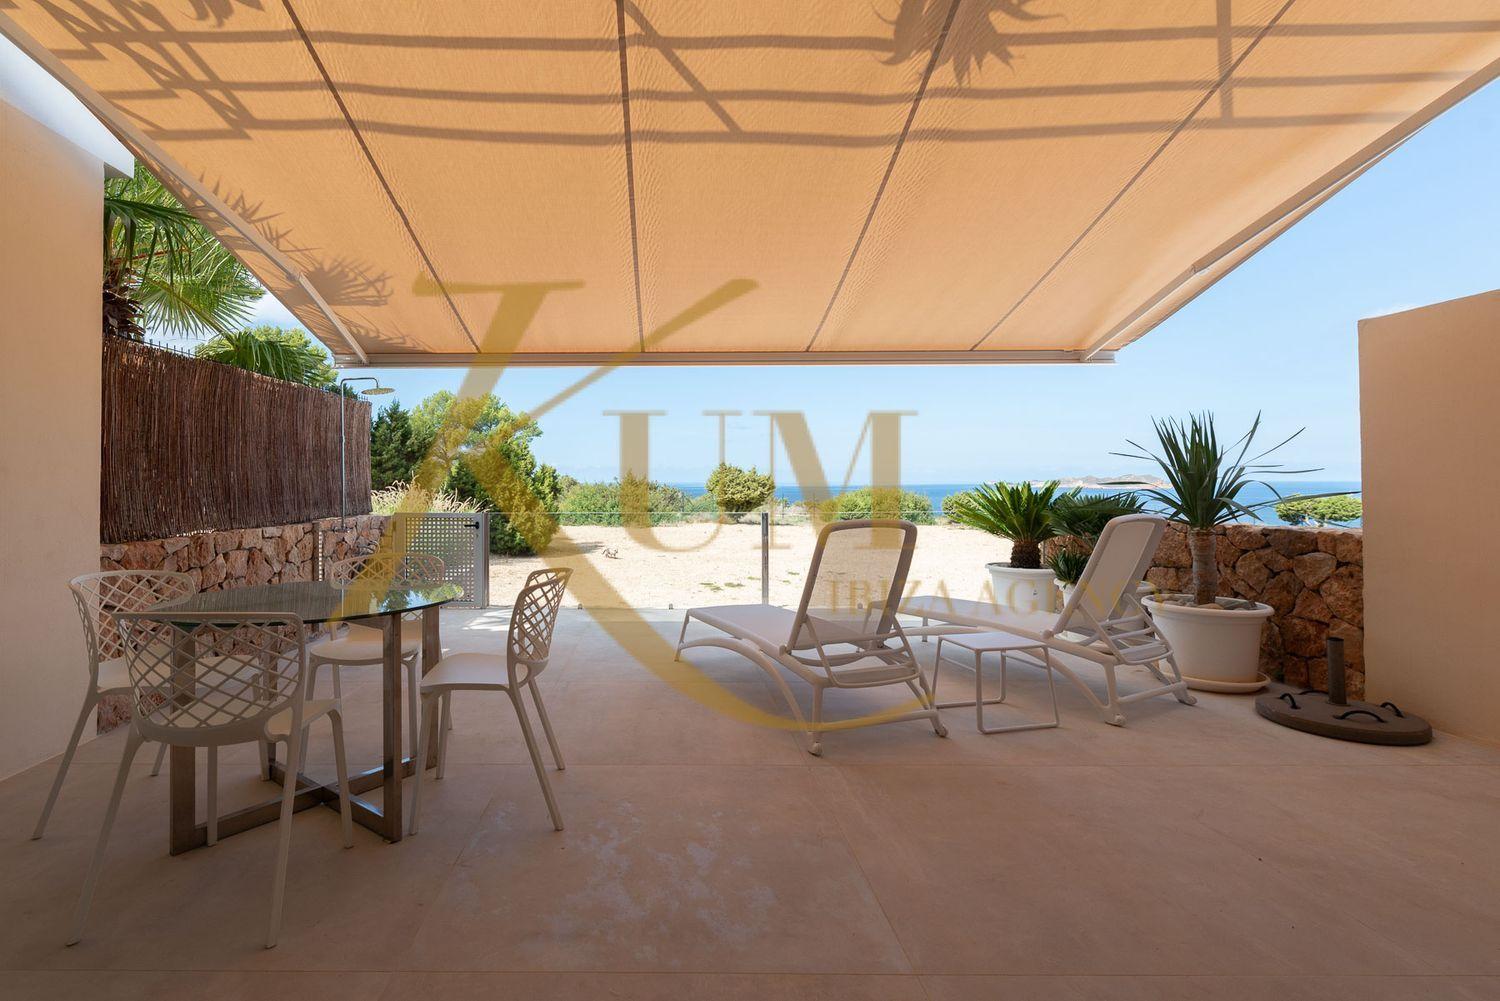 House for rent in a beautiful private urbanization in Cala Tarida.